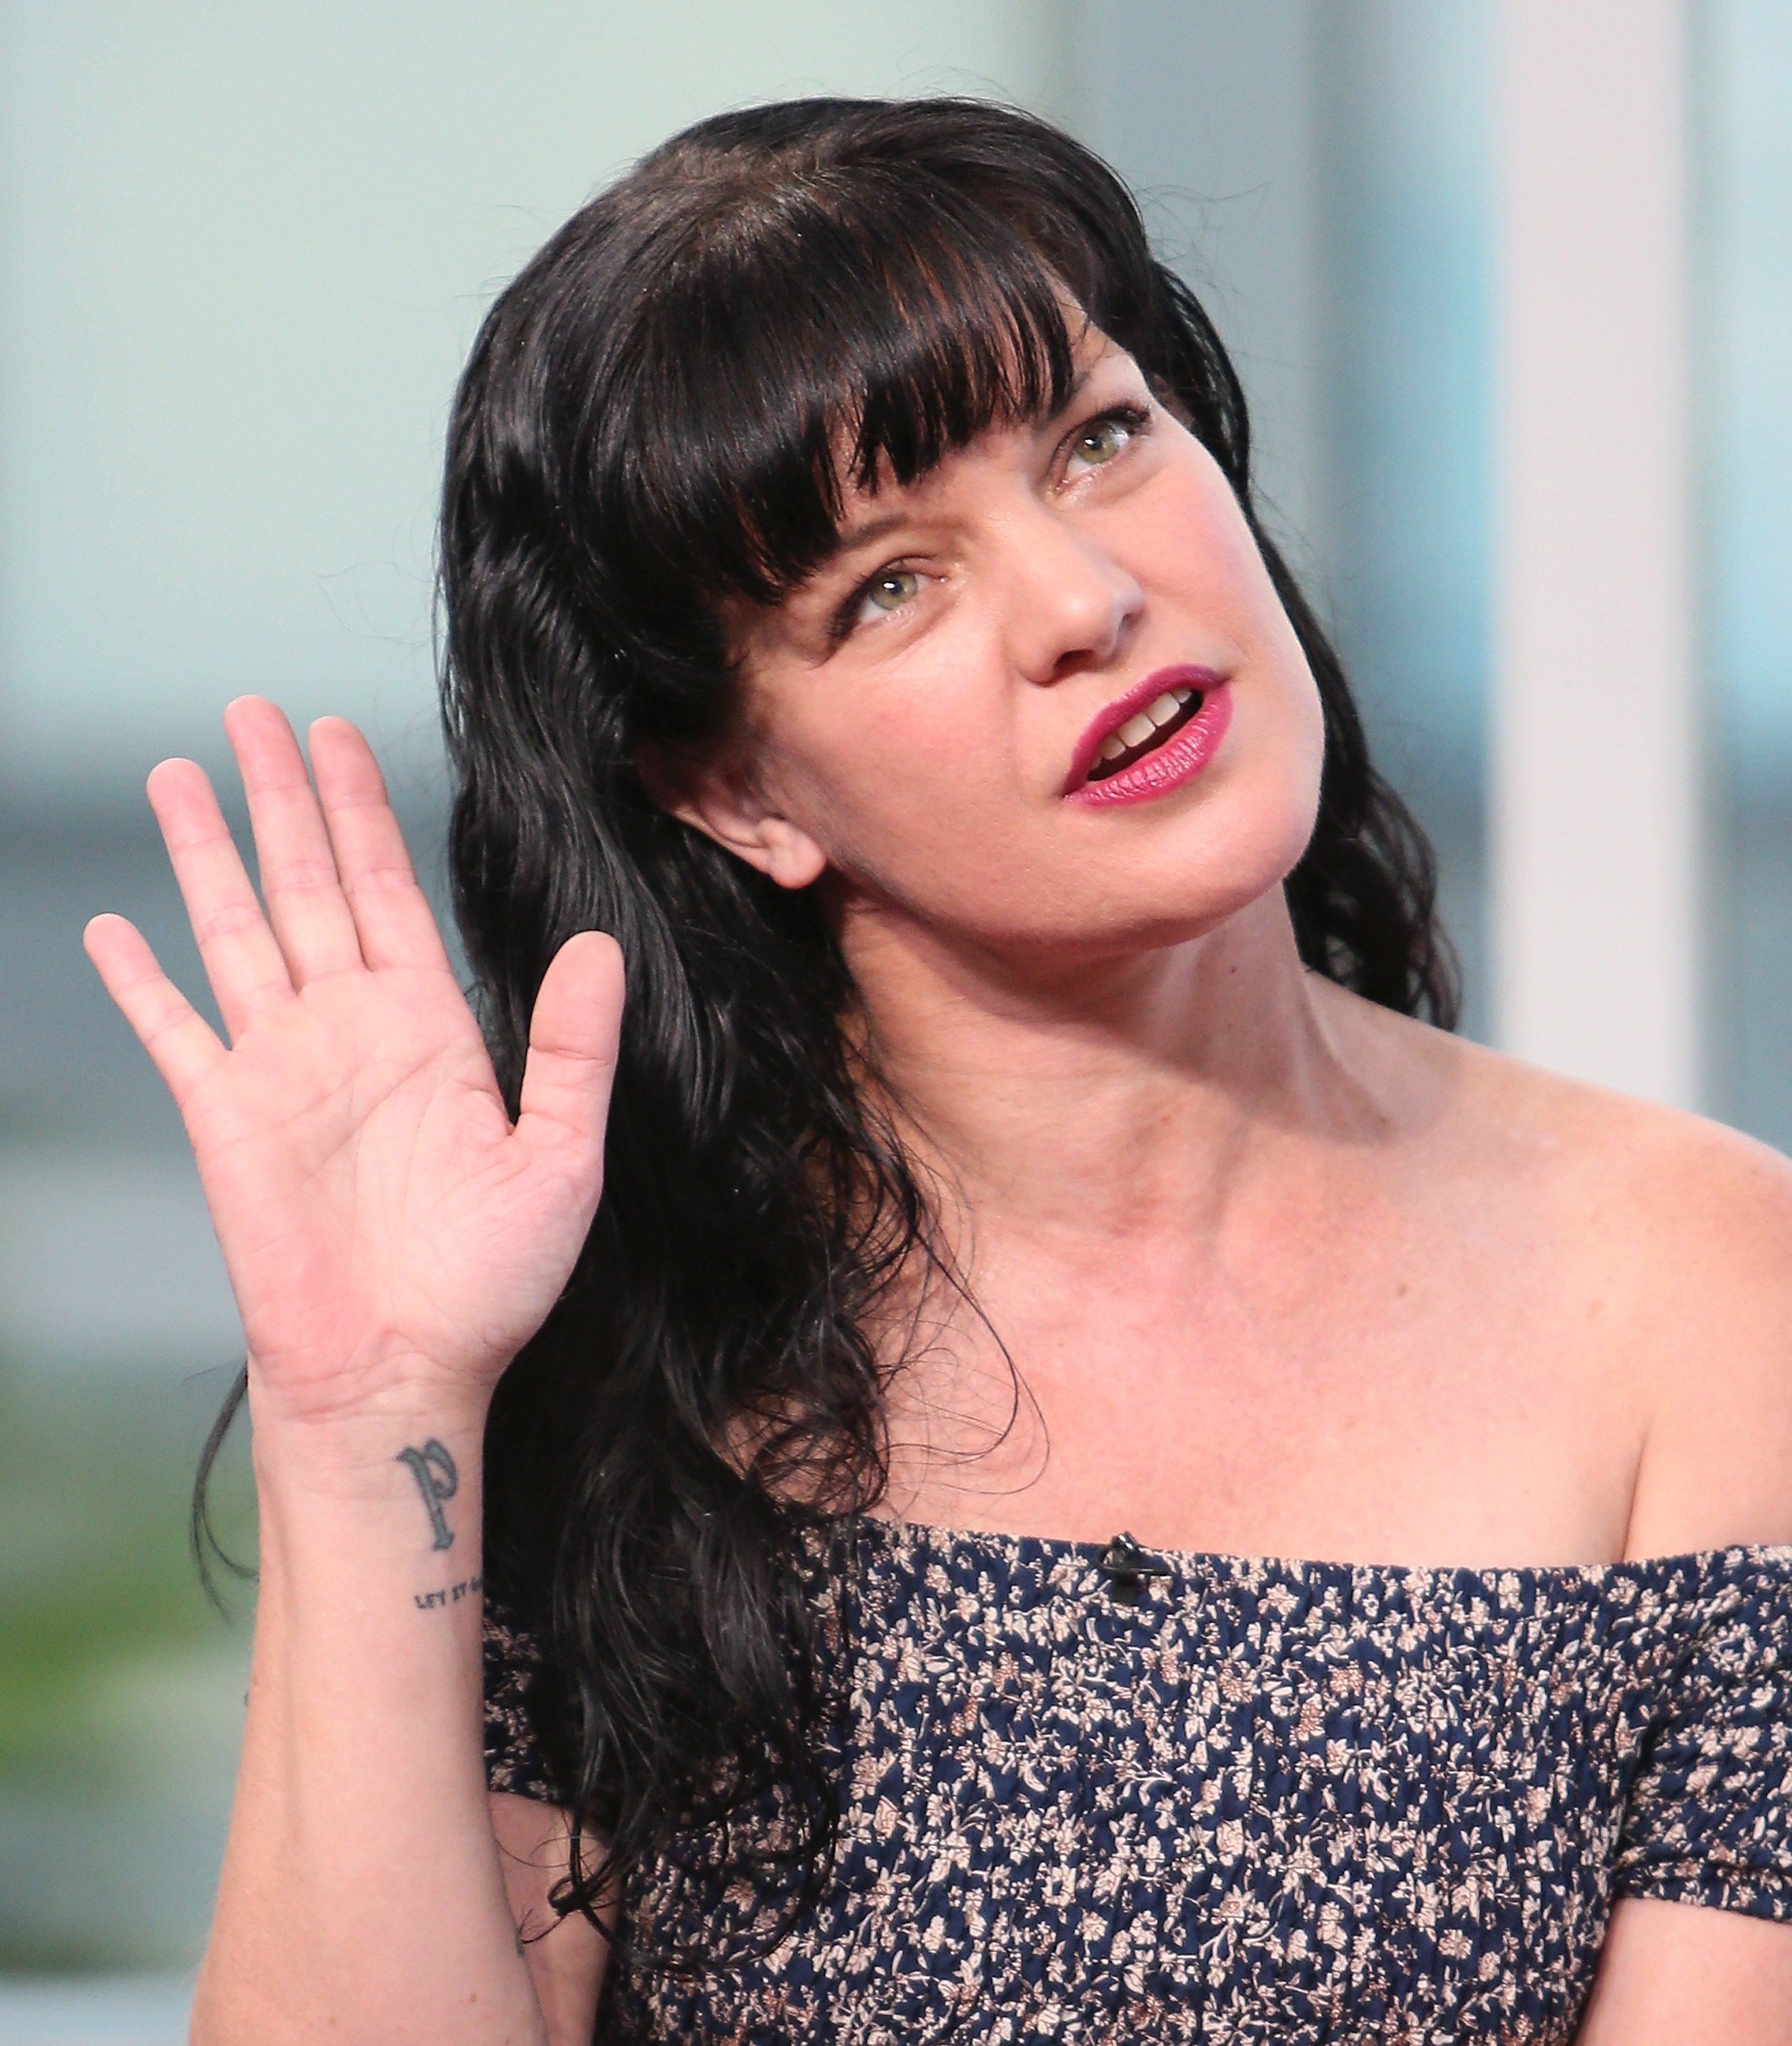 Pauley Perrette, actress | Photo: Getty Images